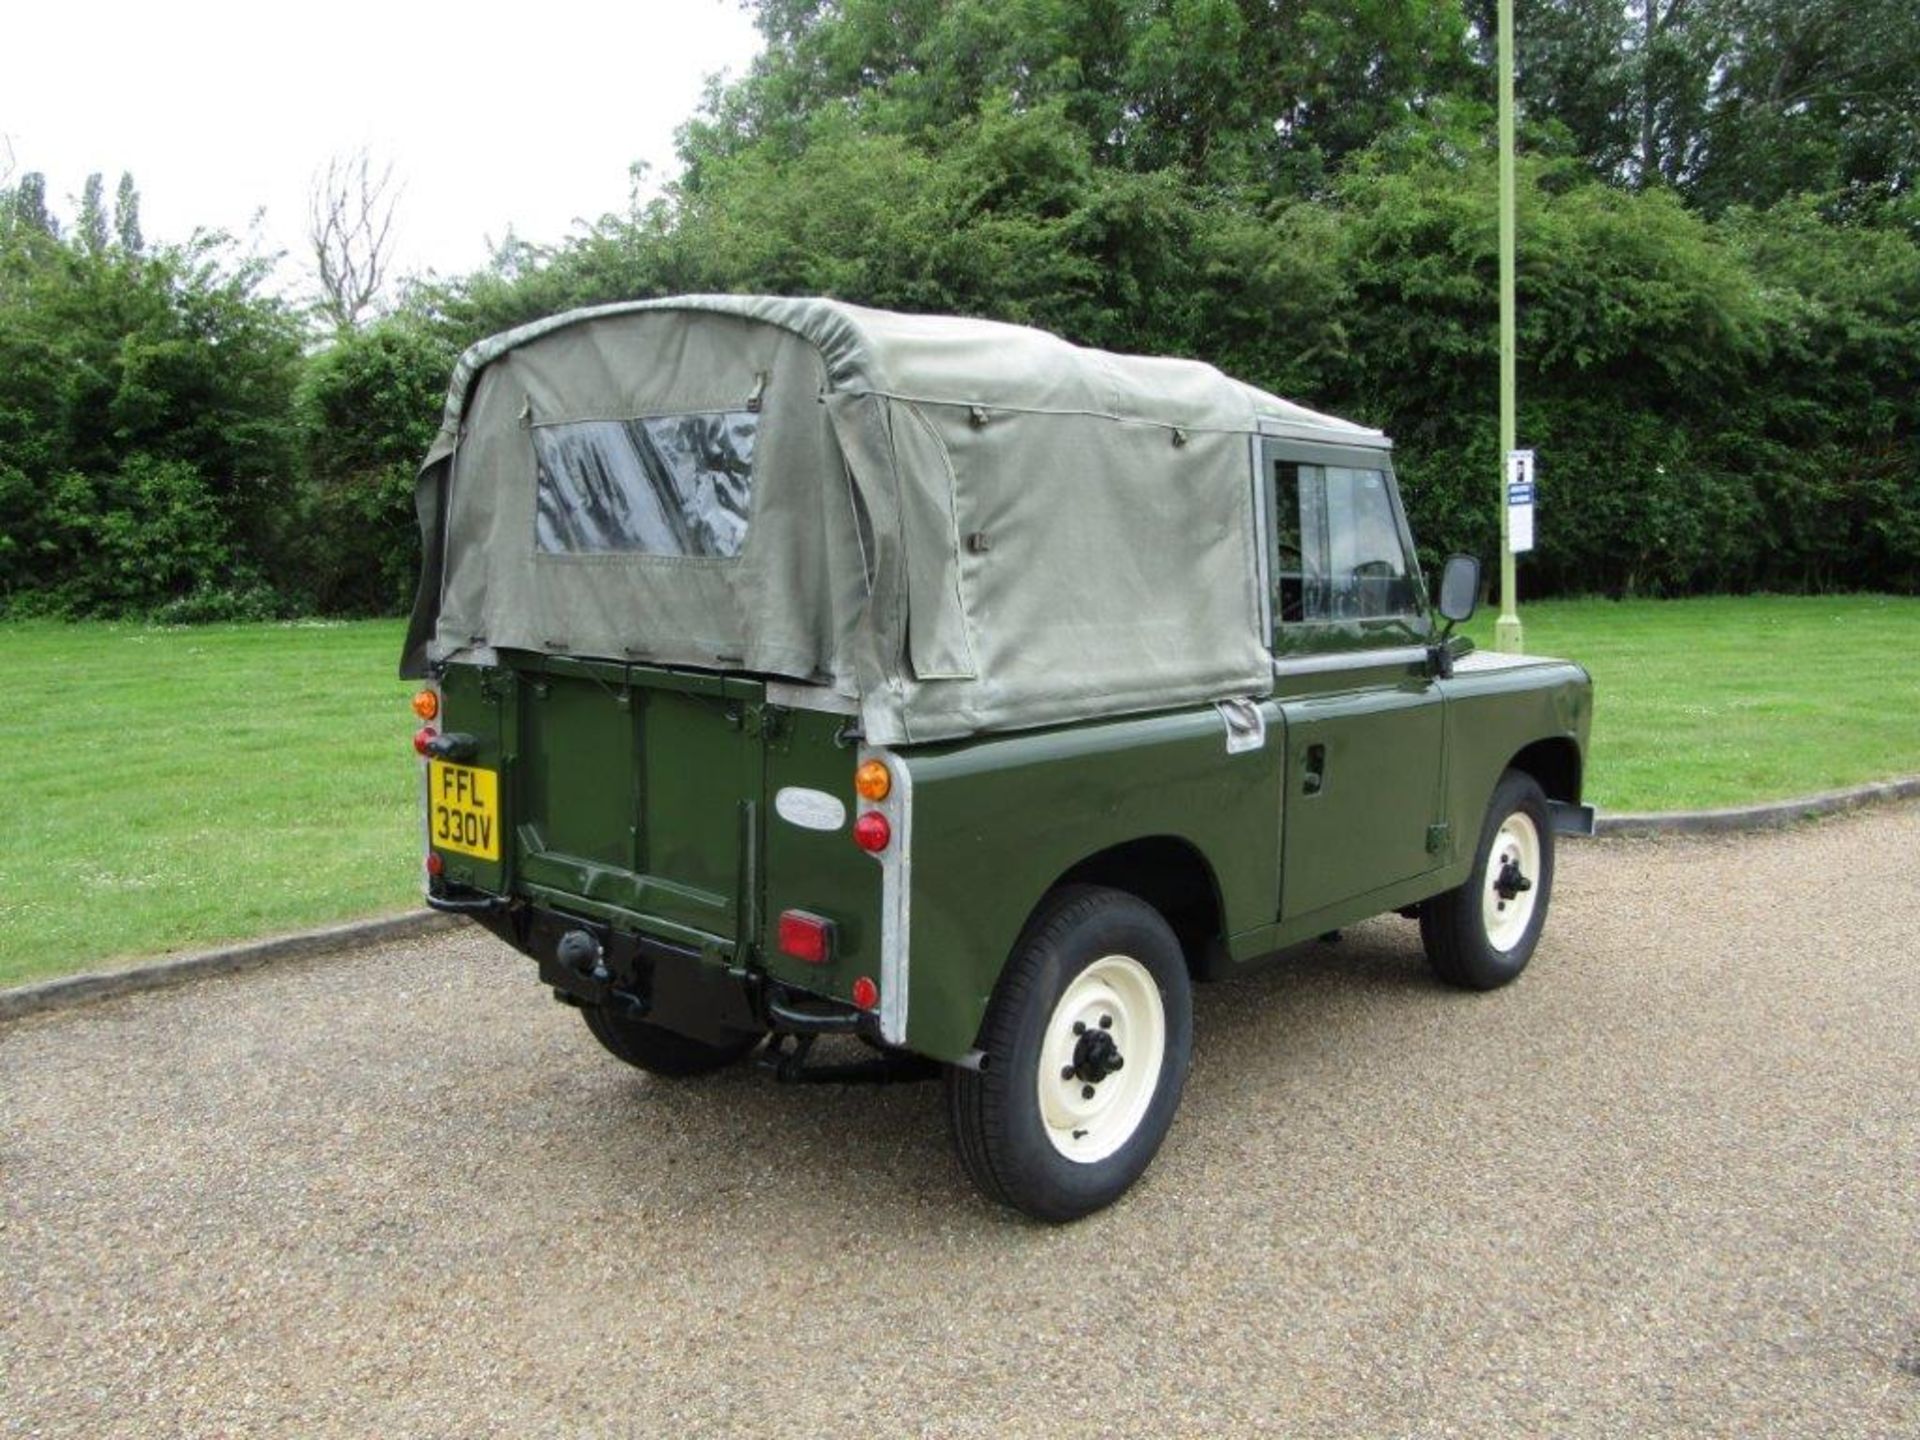 1980 Land Rover Series III - Image 8 of 25